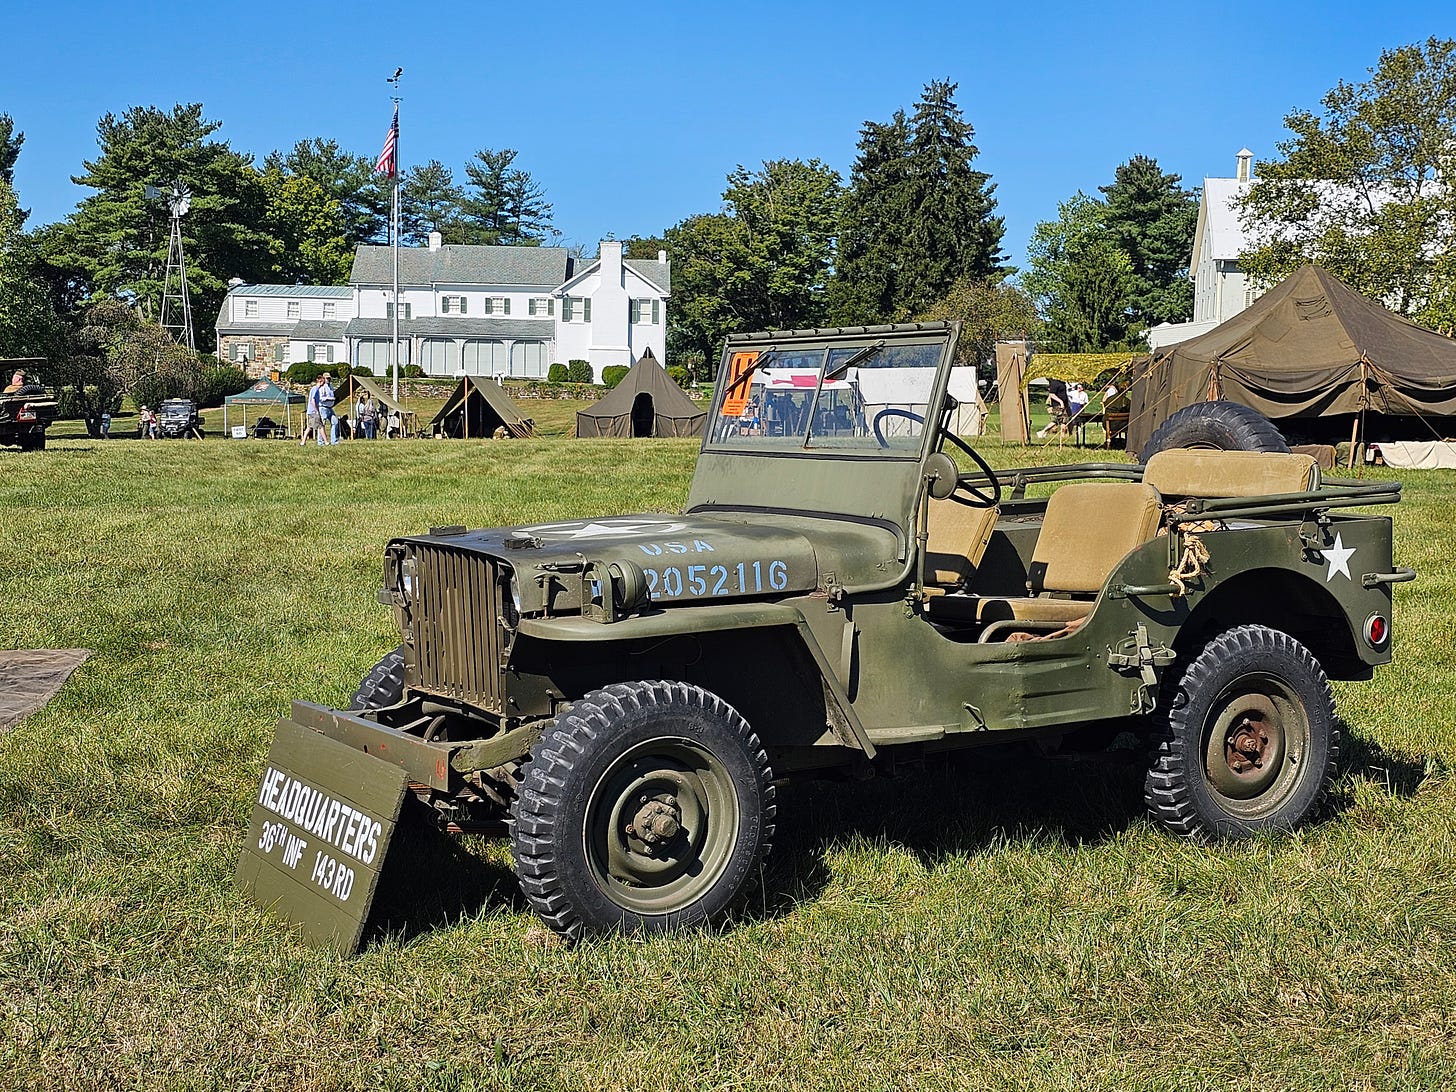 A WWII Era jeep in front of Eisenhower's house.